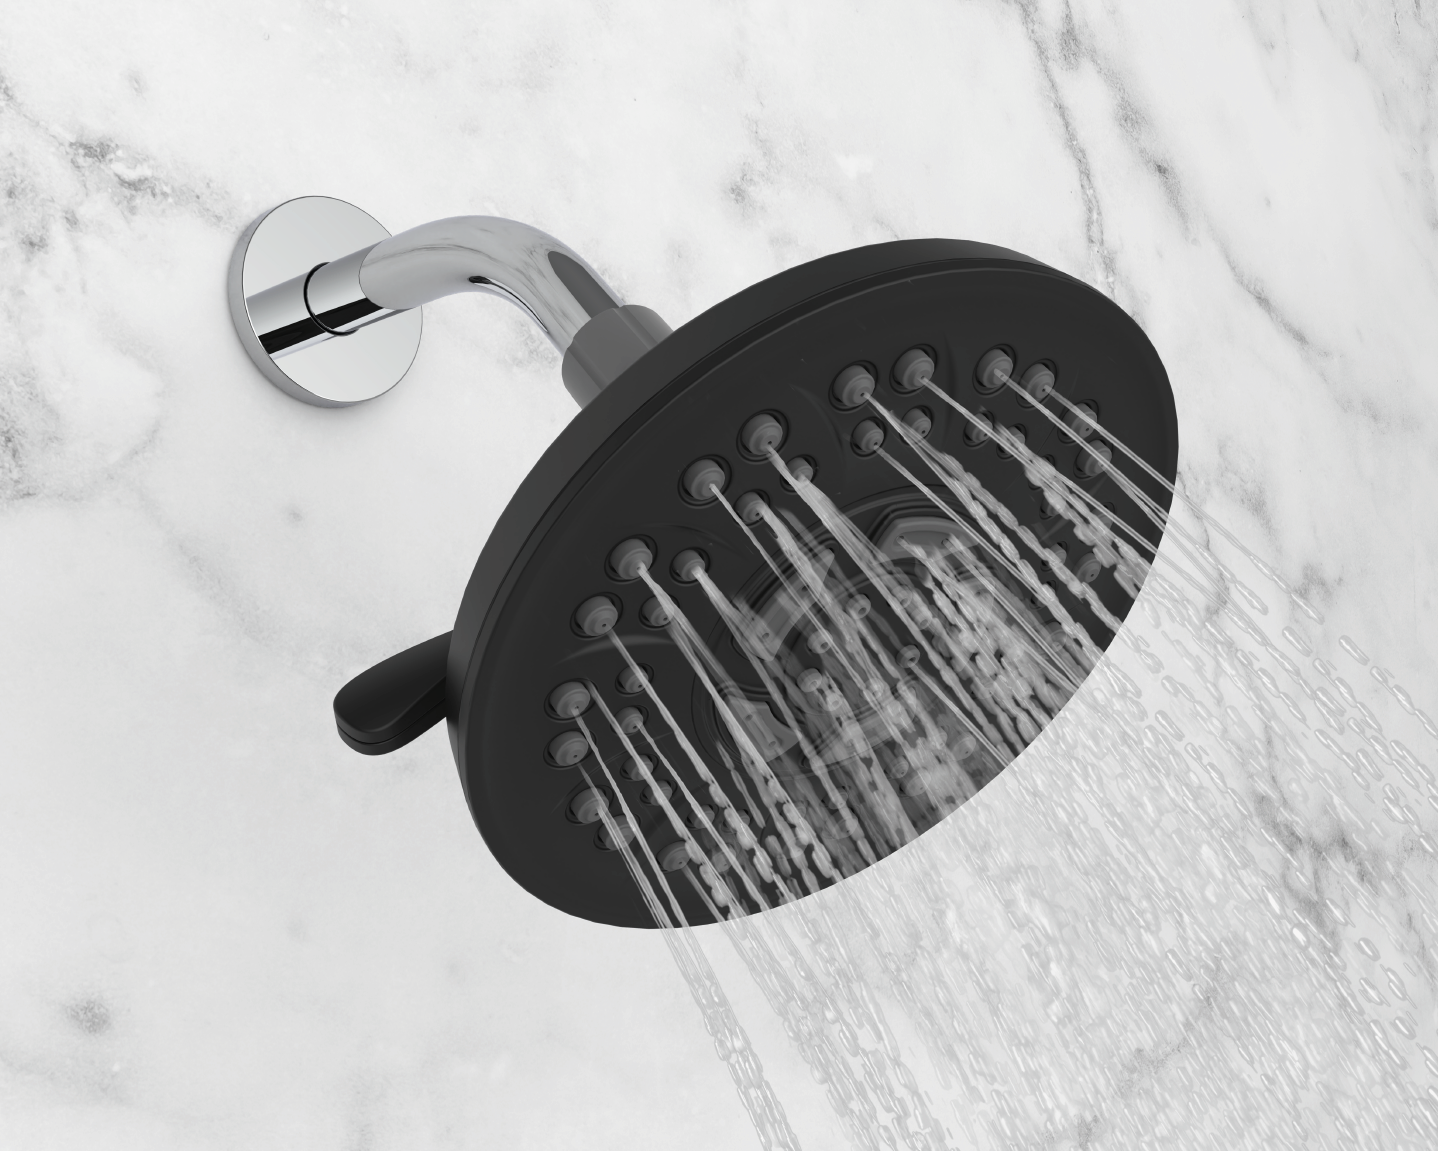 Matte Black (Ocean Plastic) shower head with water flowing out. Made with up to 25% recycled nearshore ocean plastic.